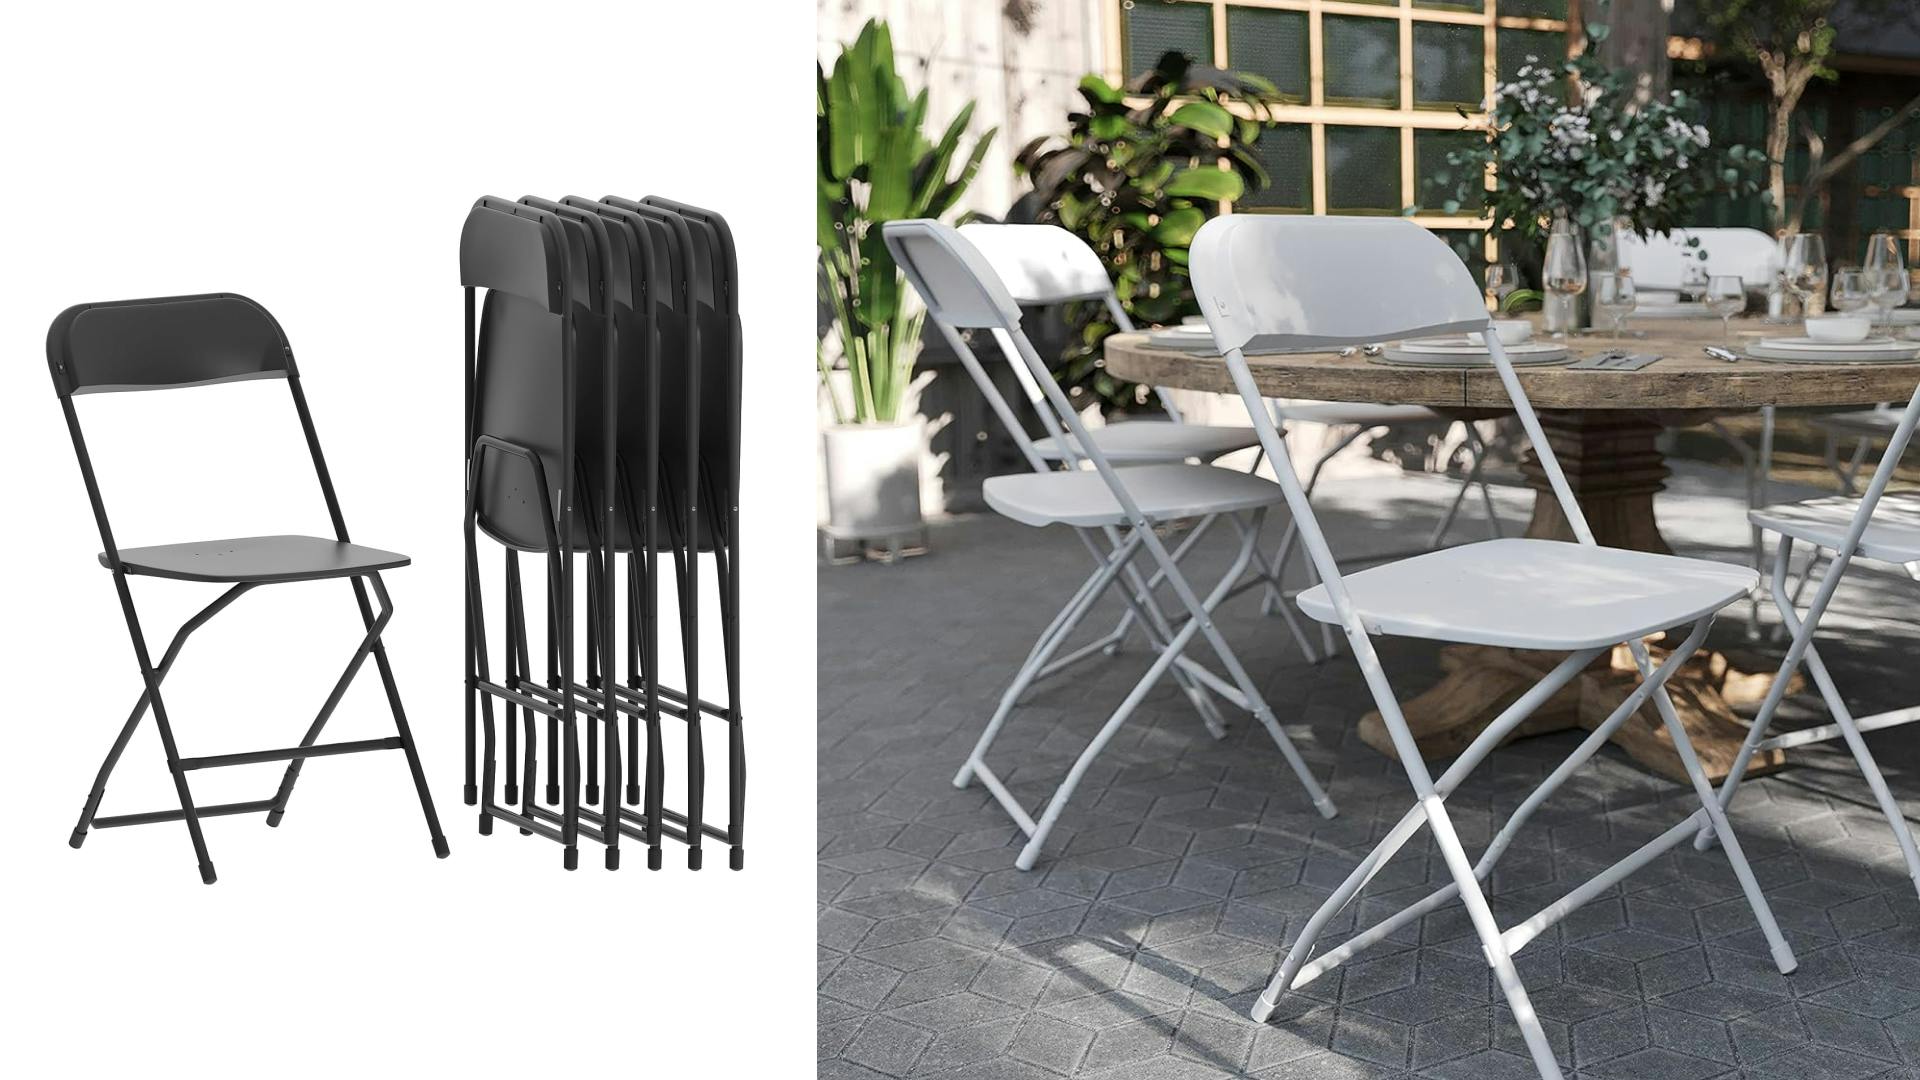 extra folding chairs for added seating